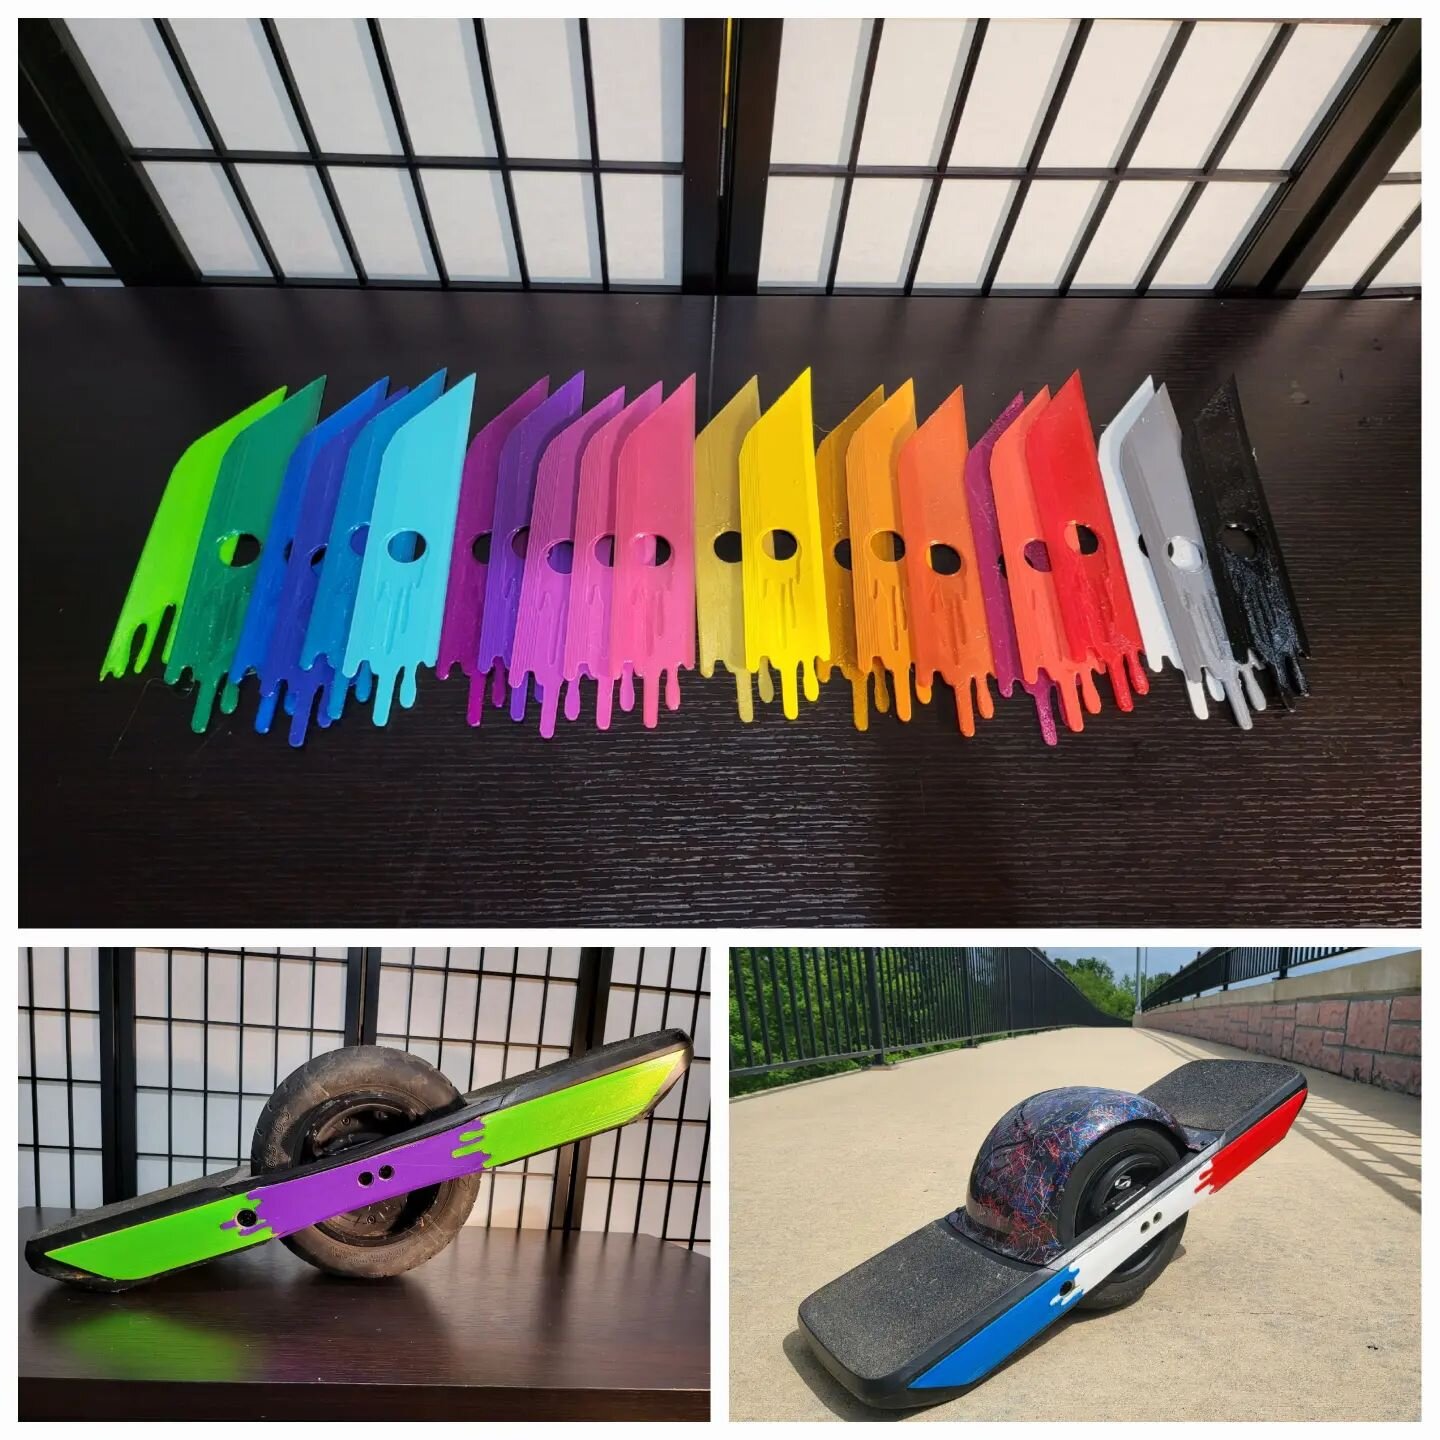 Slime Rail Guards
Stay drippy --💦--
All board models available

Choose up to 3 colors 

#onewheel #elitecustomsow #shred #3dprinting #slime #onewheelv1 #onewheelplus #onewheelxr #onewheelpint #onewheelpintx #onewheelgt #rideonewheel  #customonewheel